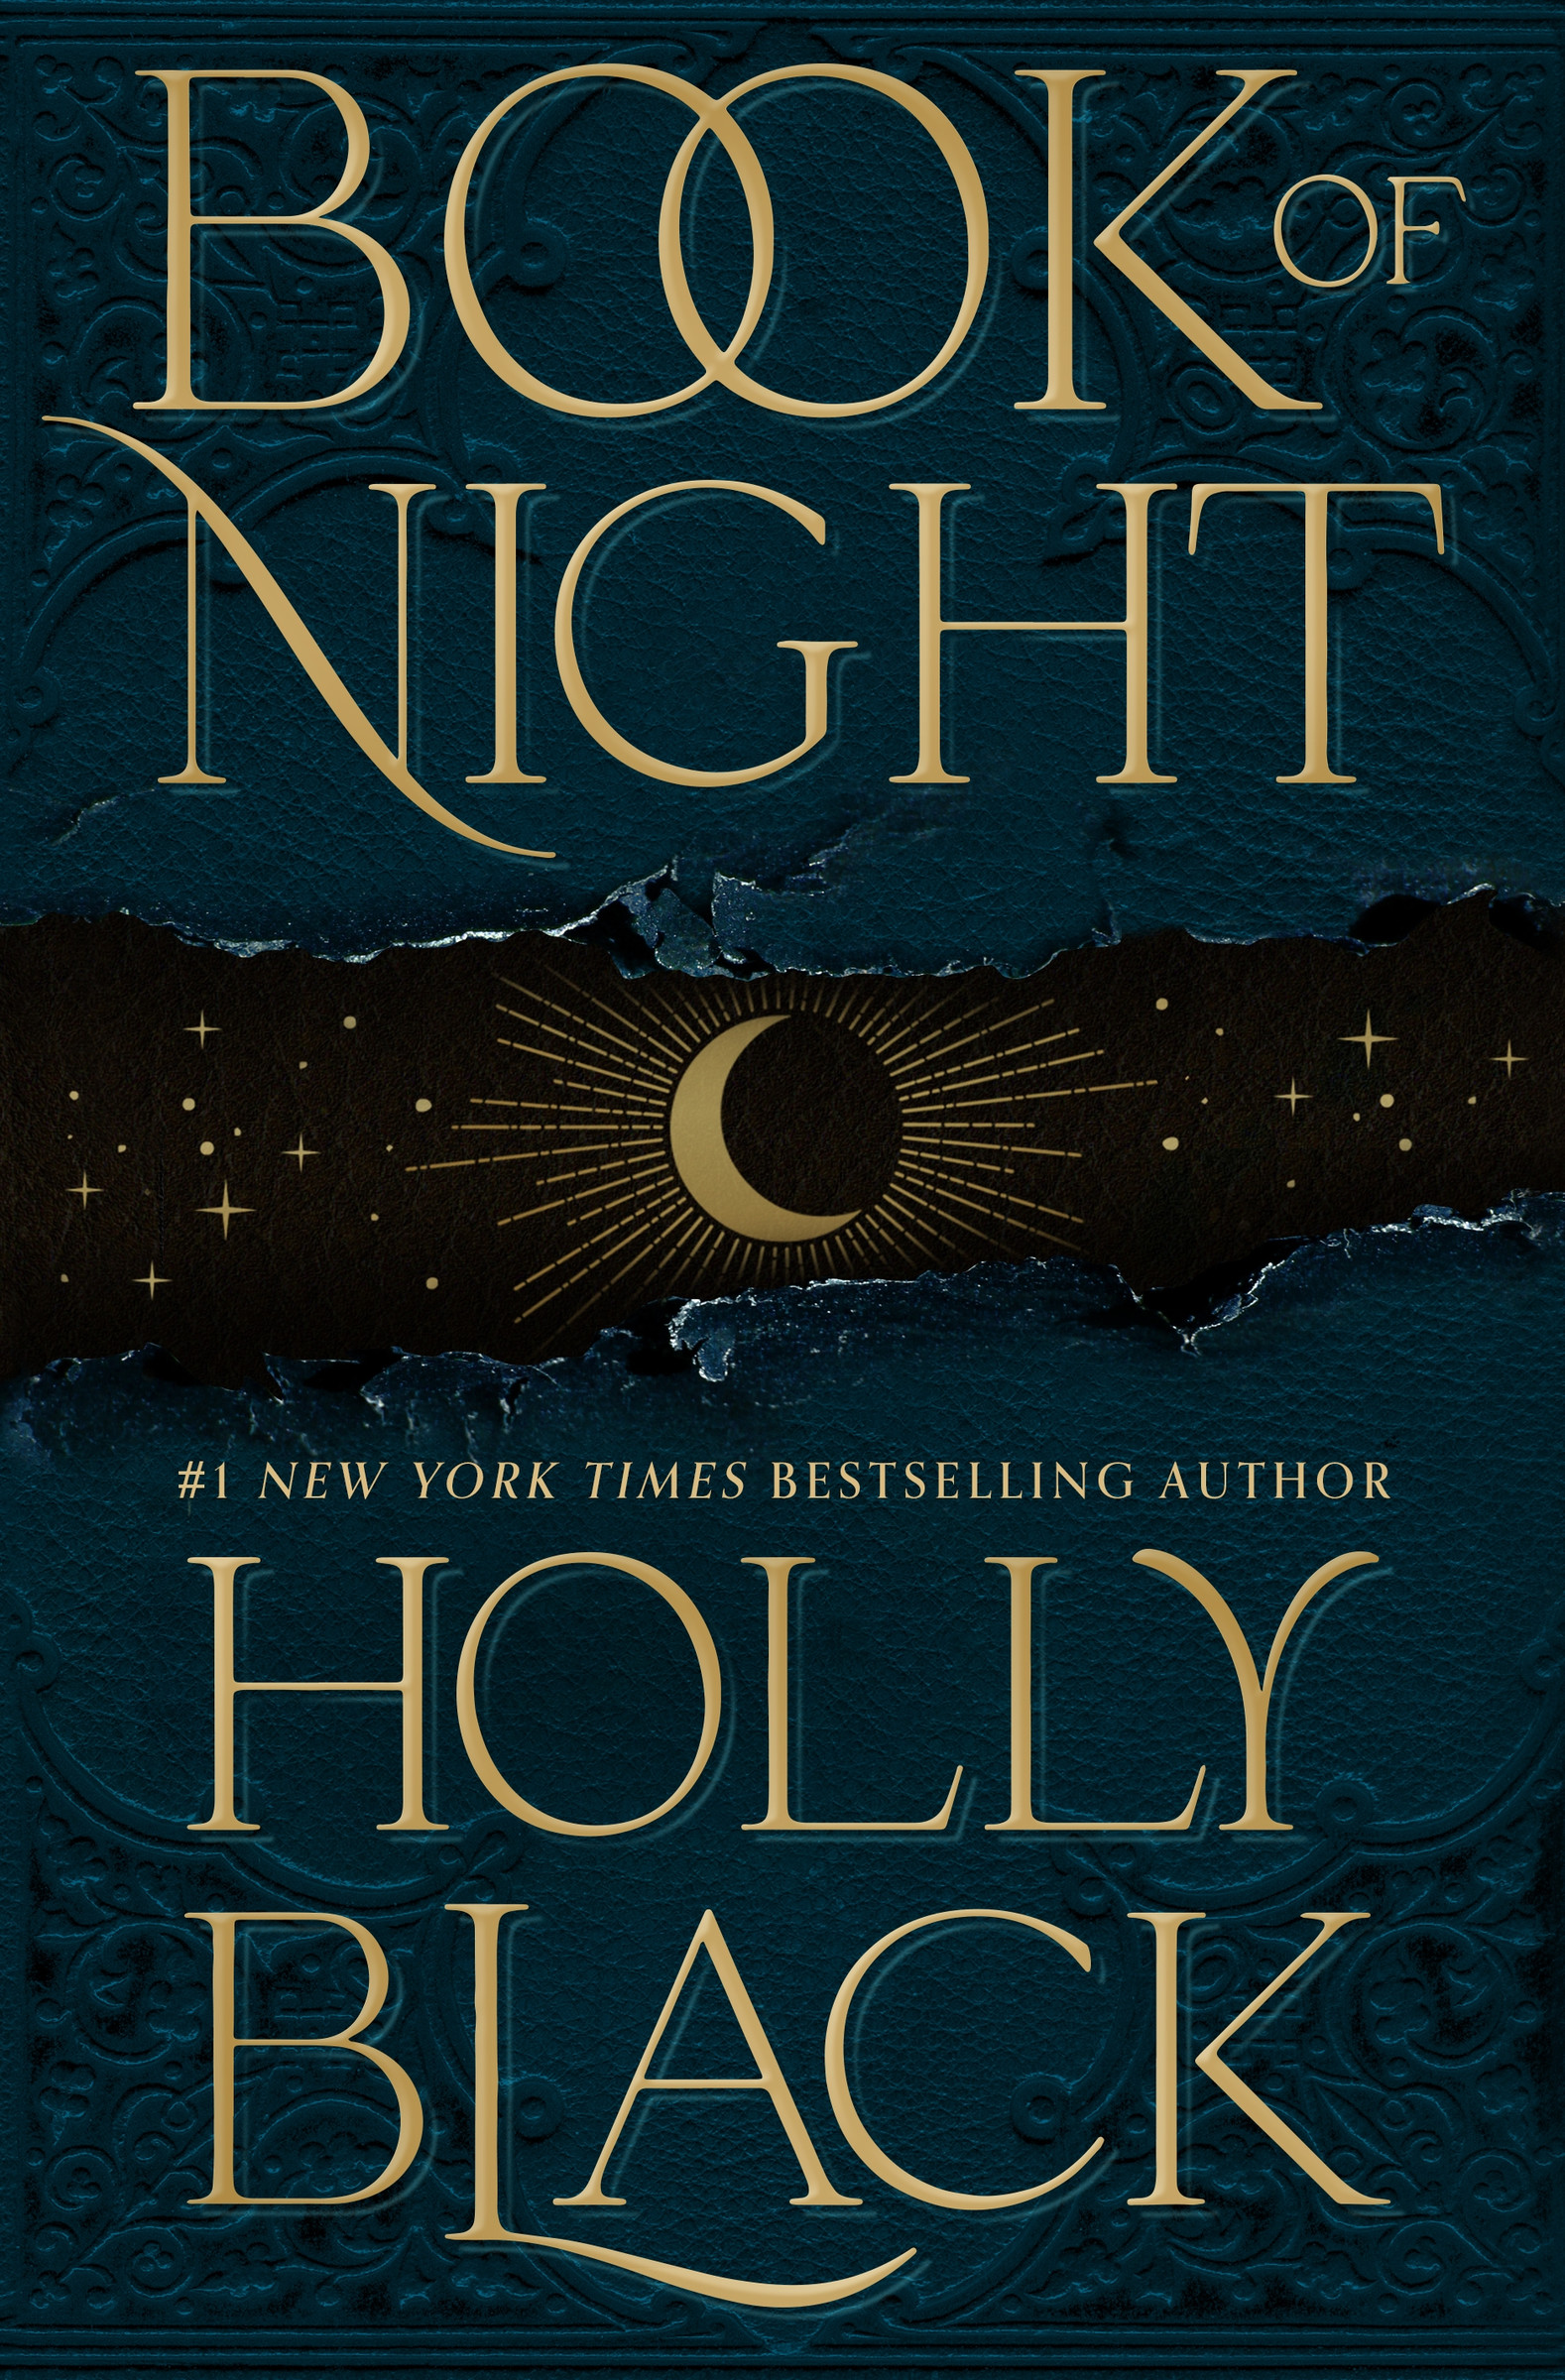 Book of Night | Science-fiction & Fantasy